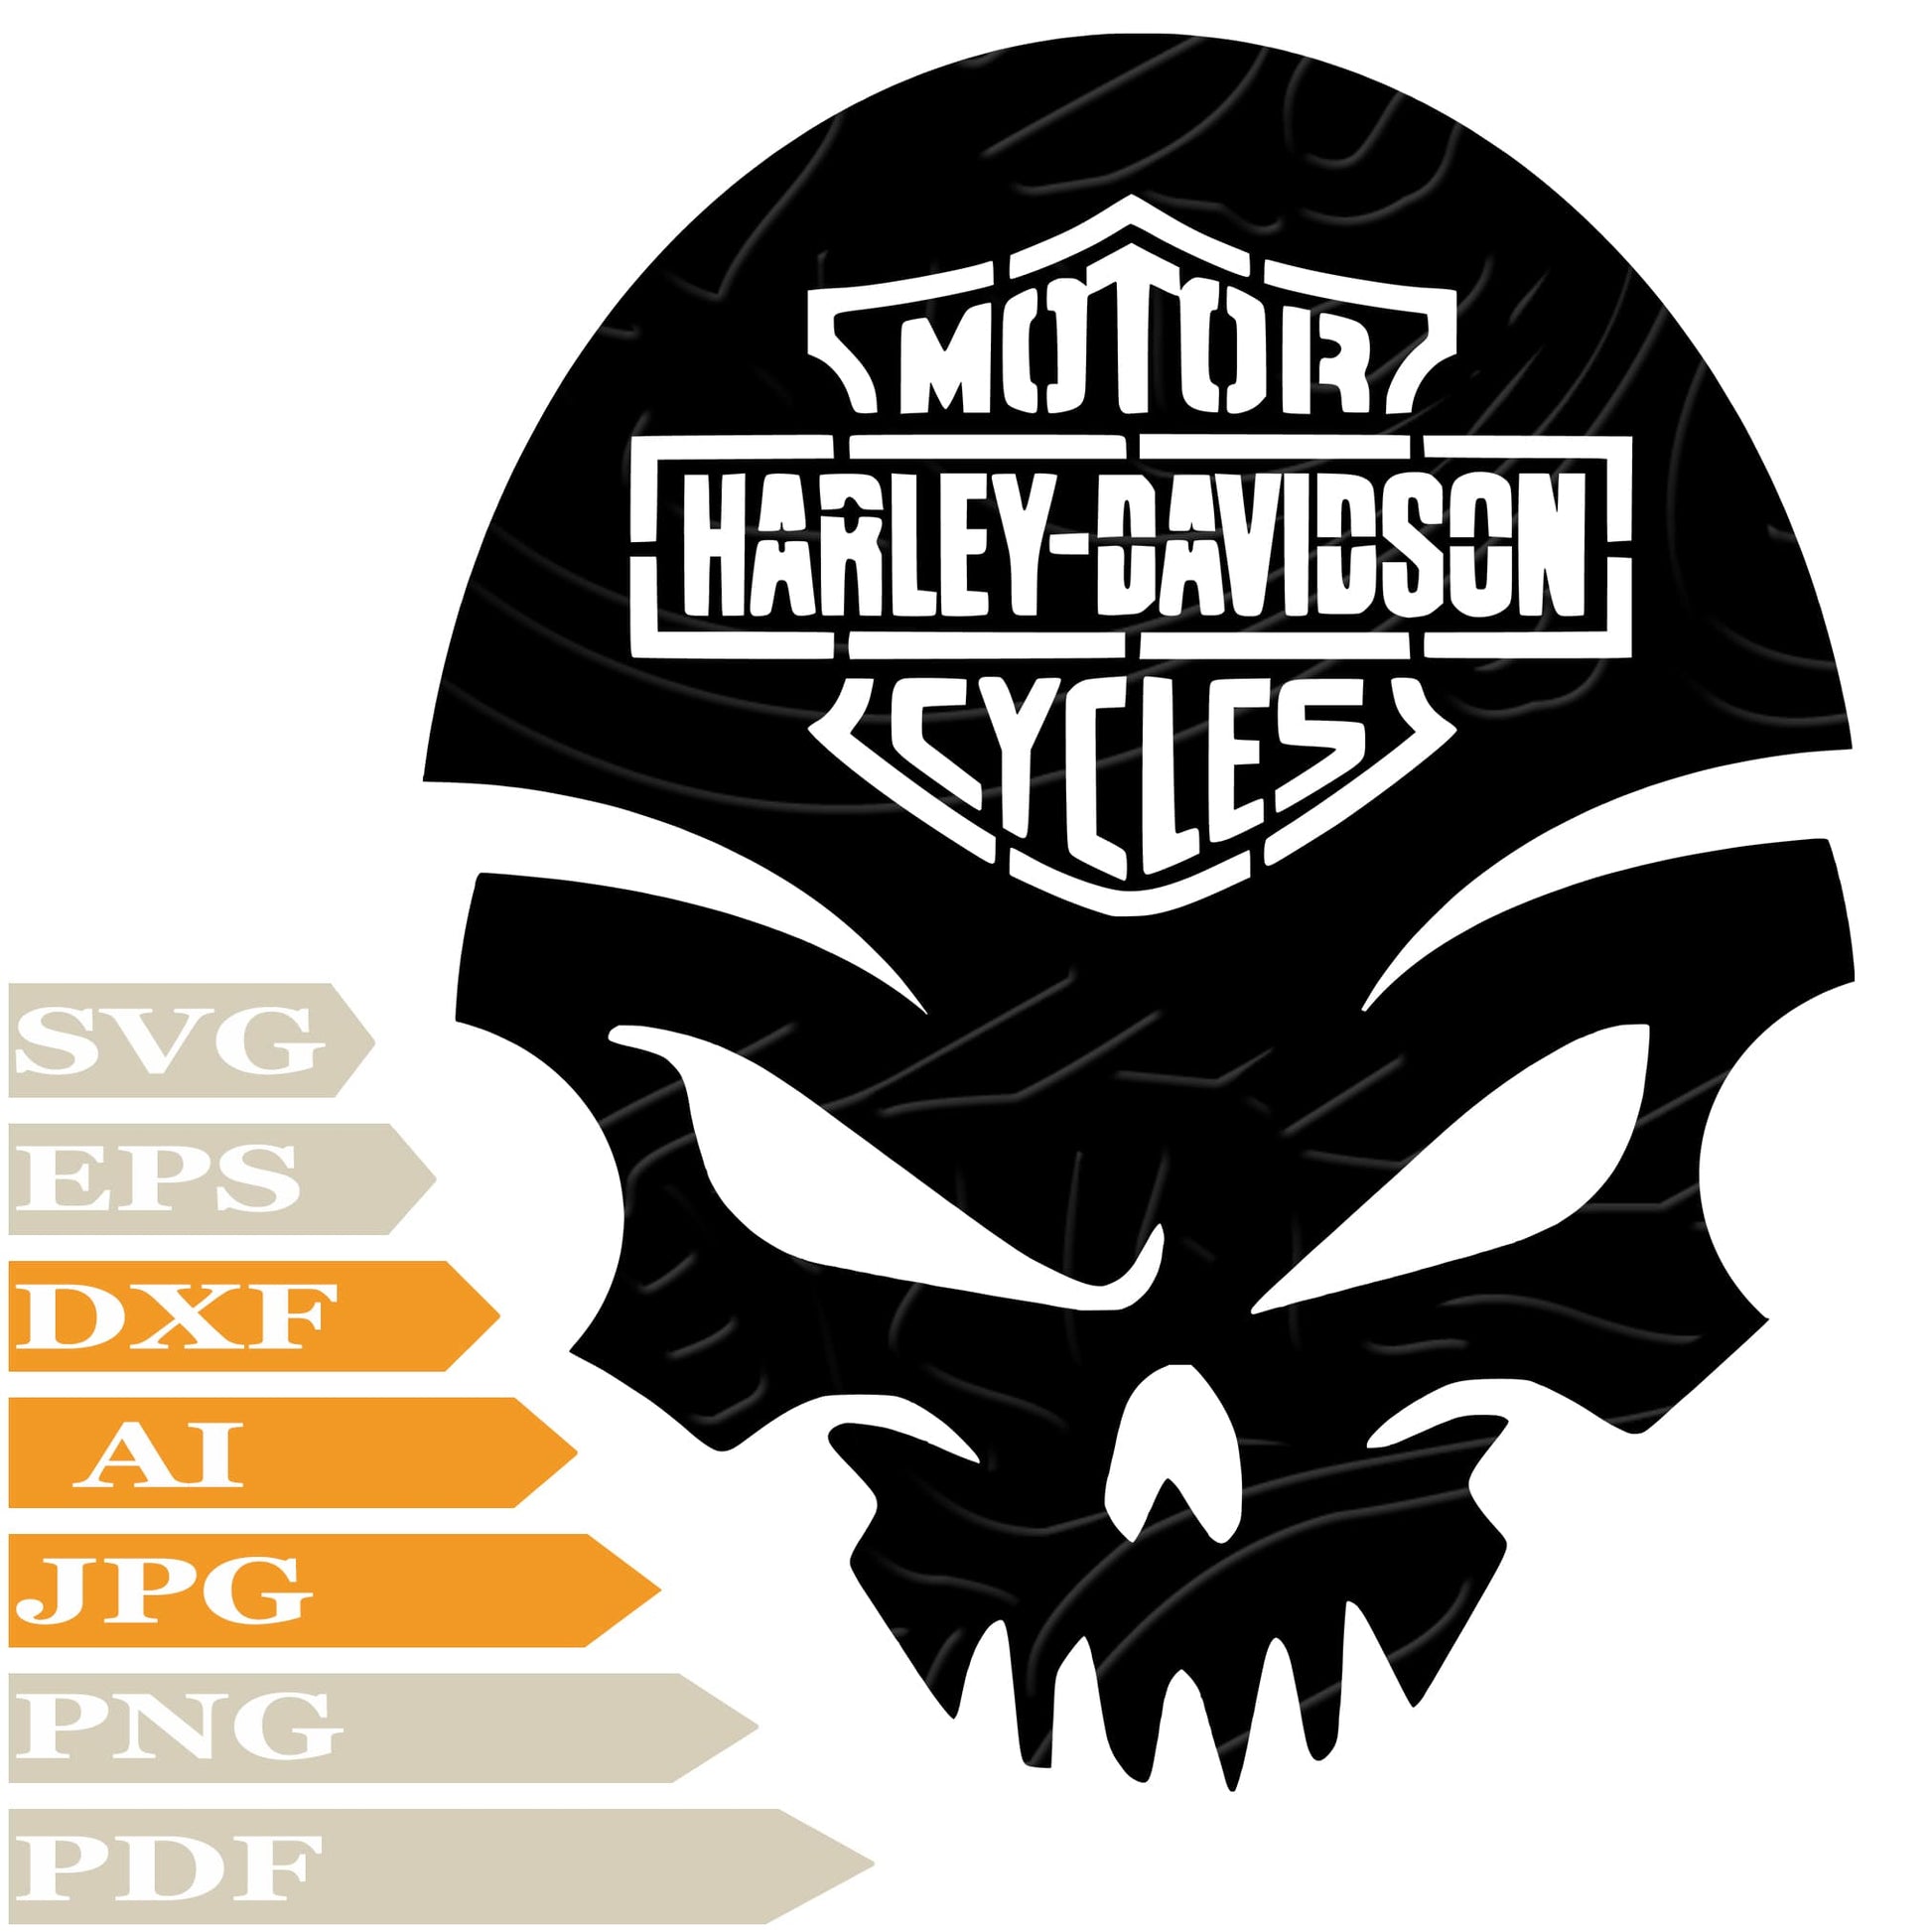 Harley SVG, Harley Davidson SVG Design, Harley Davidson Logo Vector Graphics, Skull Harley Davidson For Cricut, For Tattoo, Clip Art, Cut File, T-Shirts, Silhouette, All Available